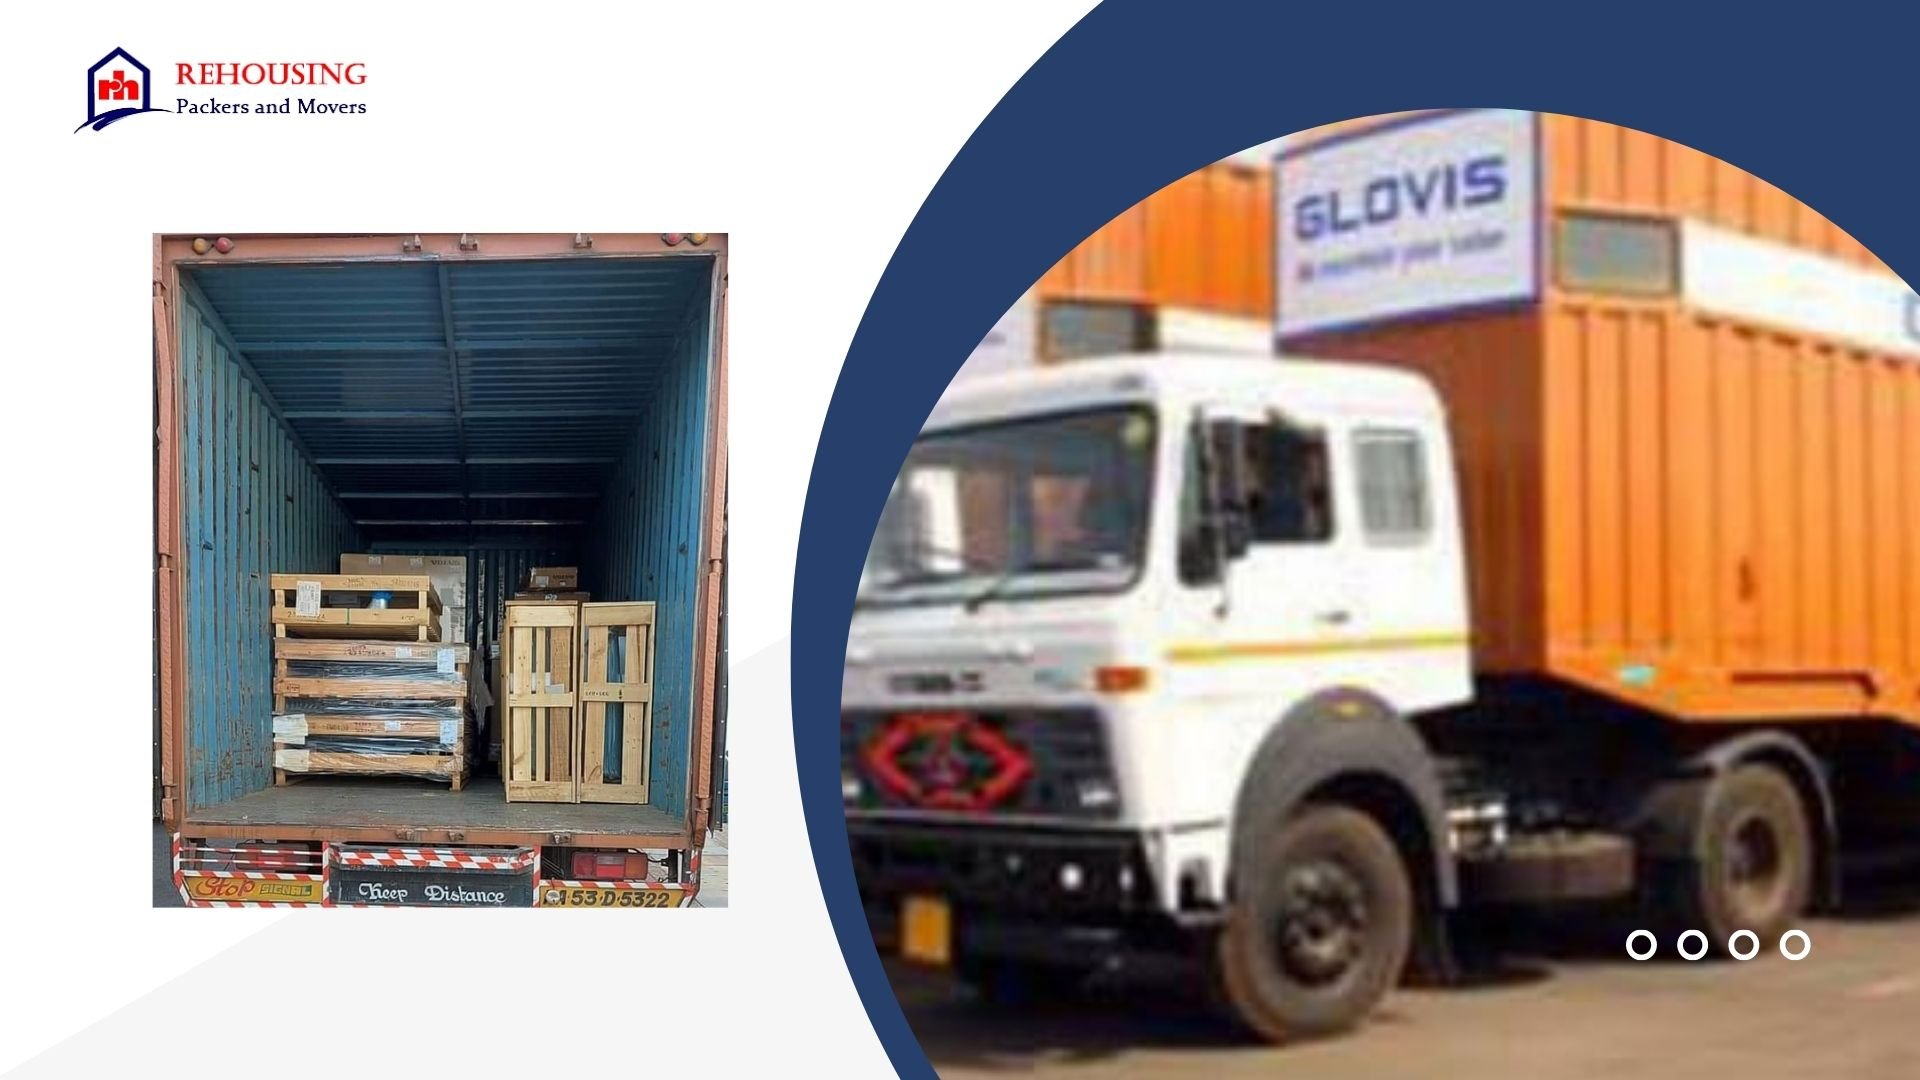 Packers and Movers From Dehradun to Kanpur | Rehousing packers and movers